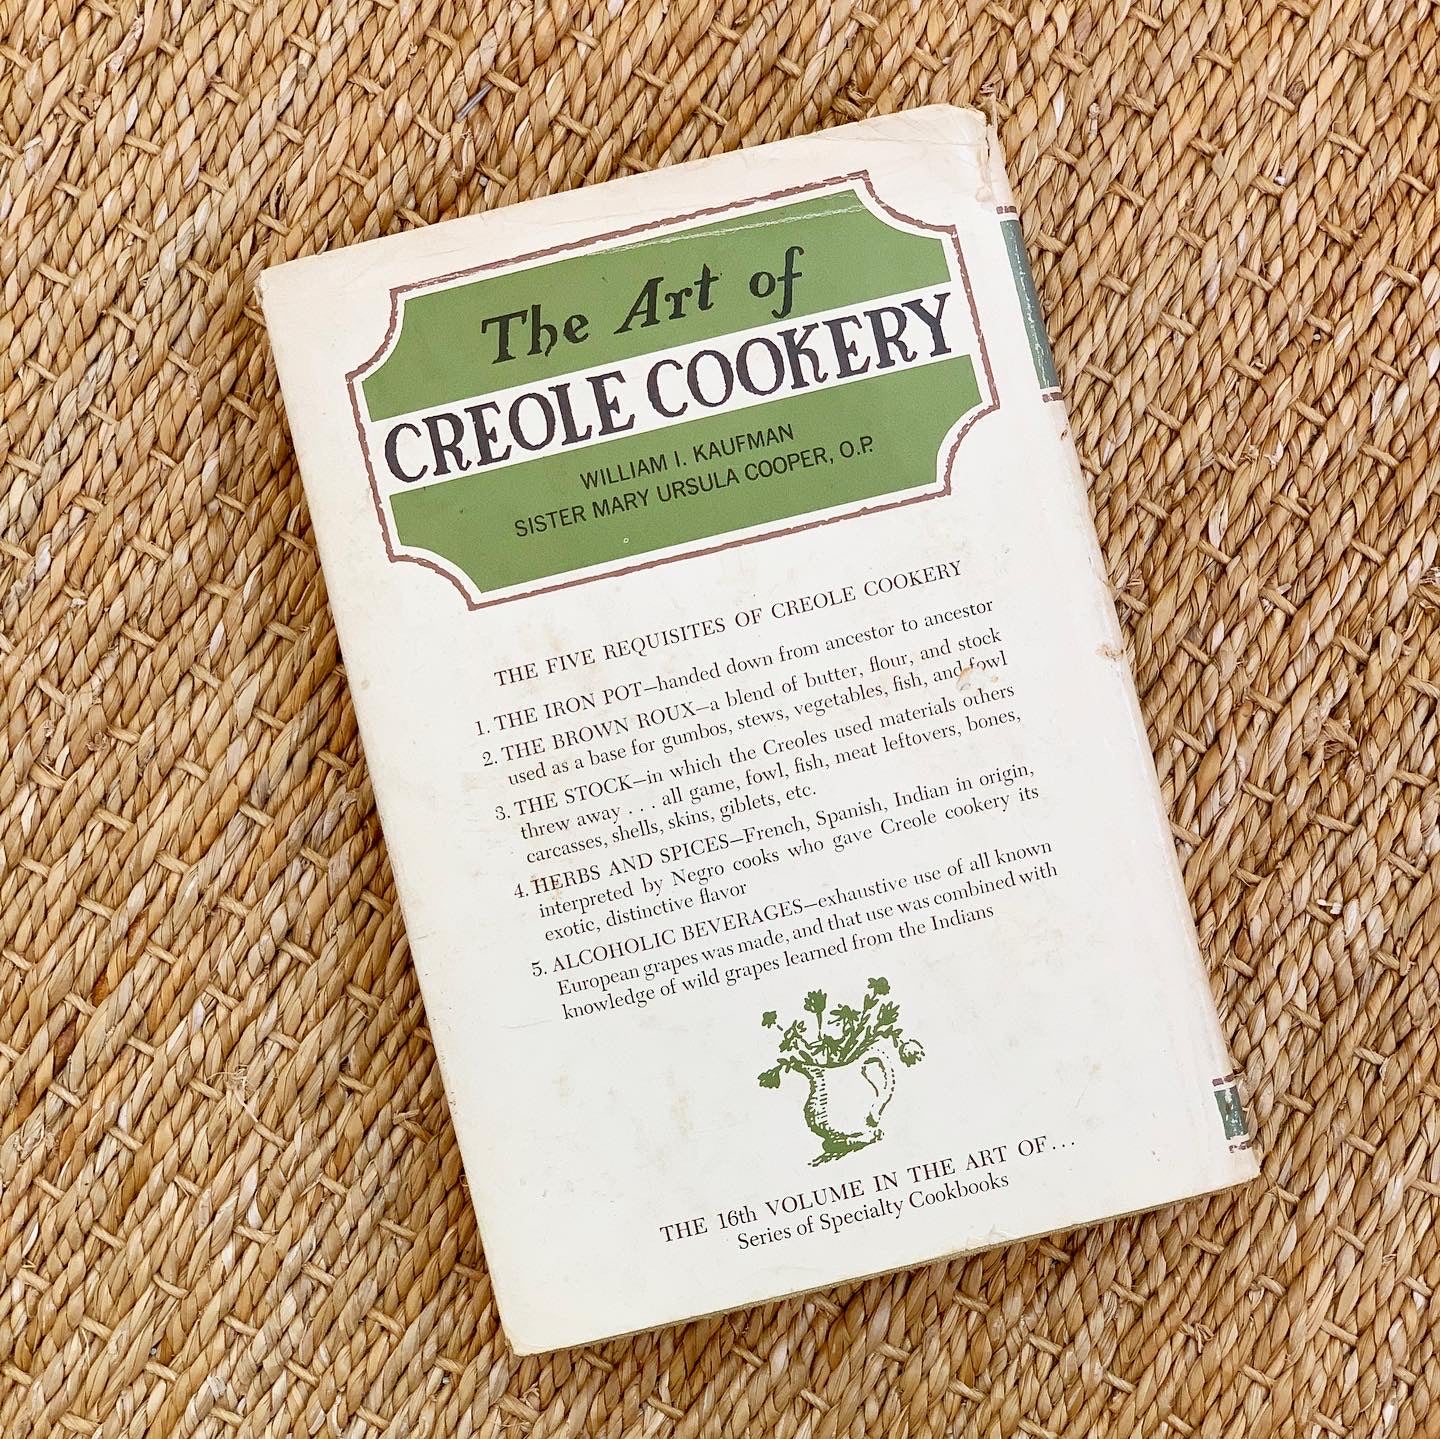 The Art of Creole Cookery (1962)